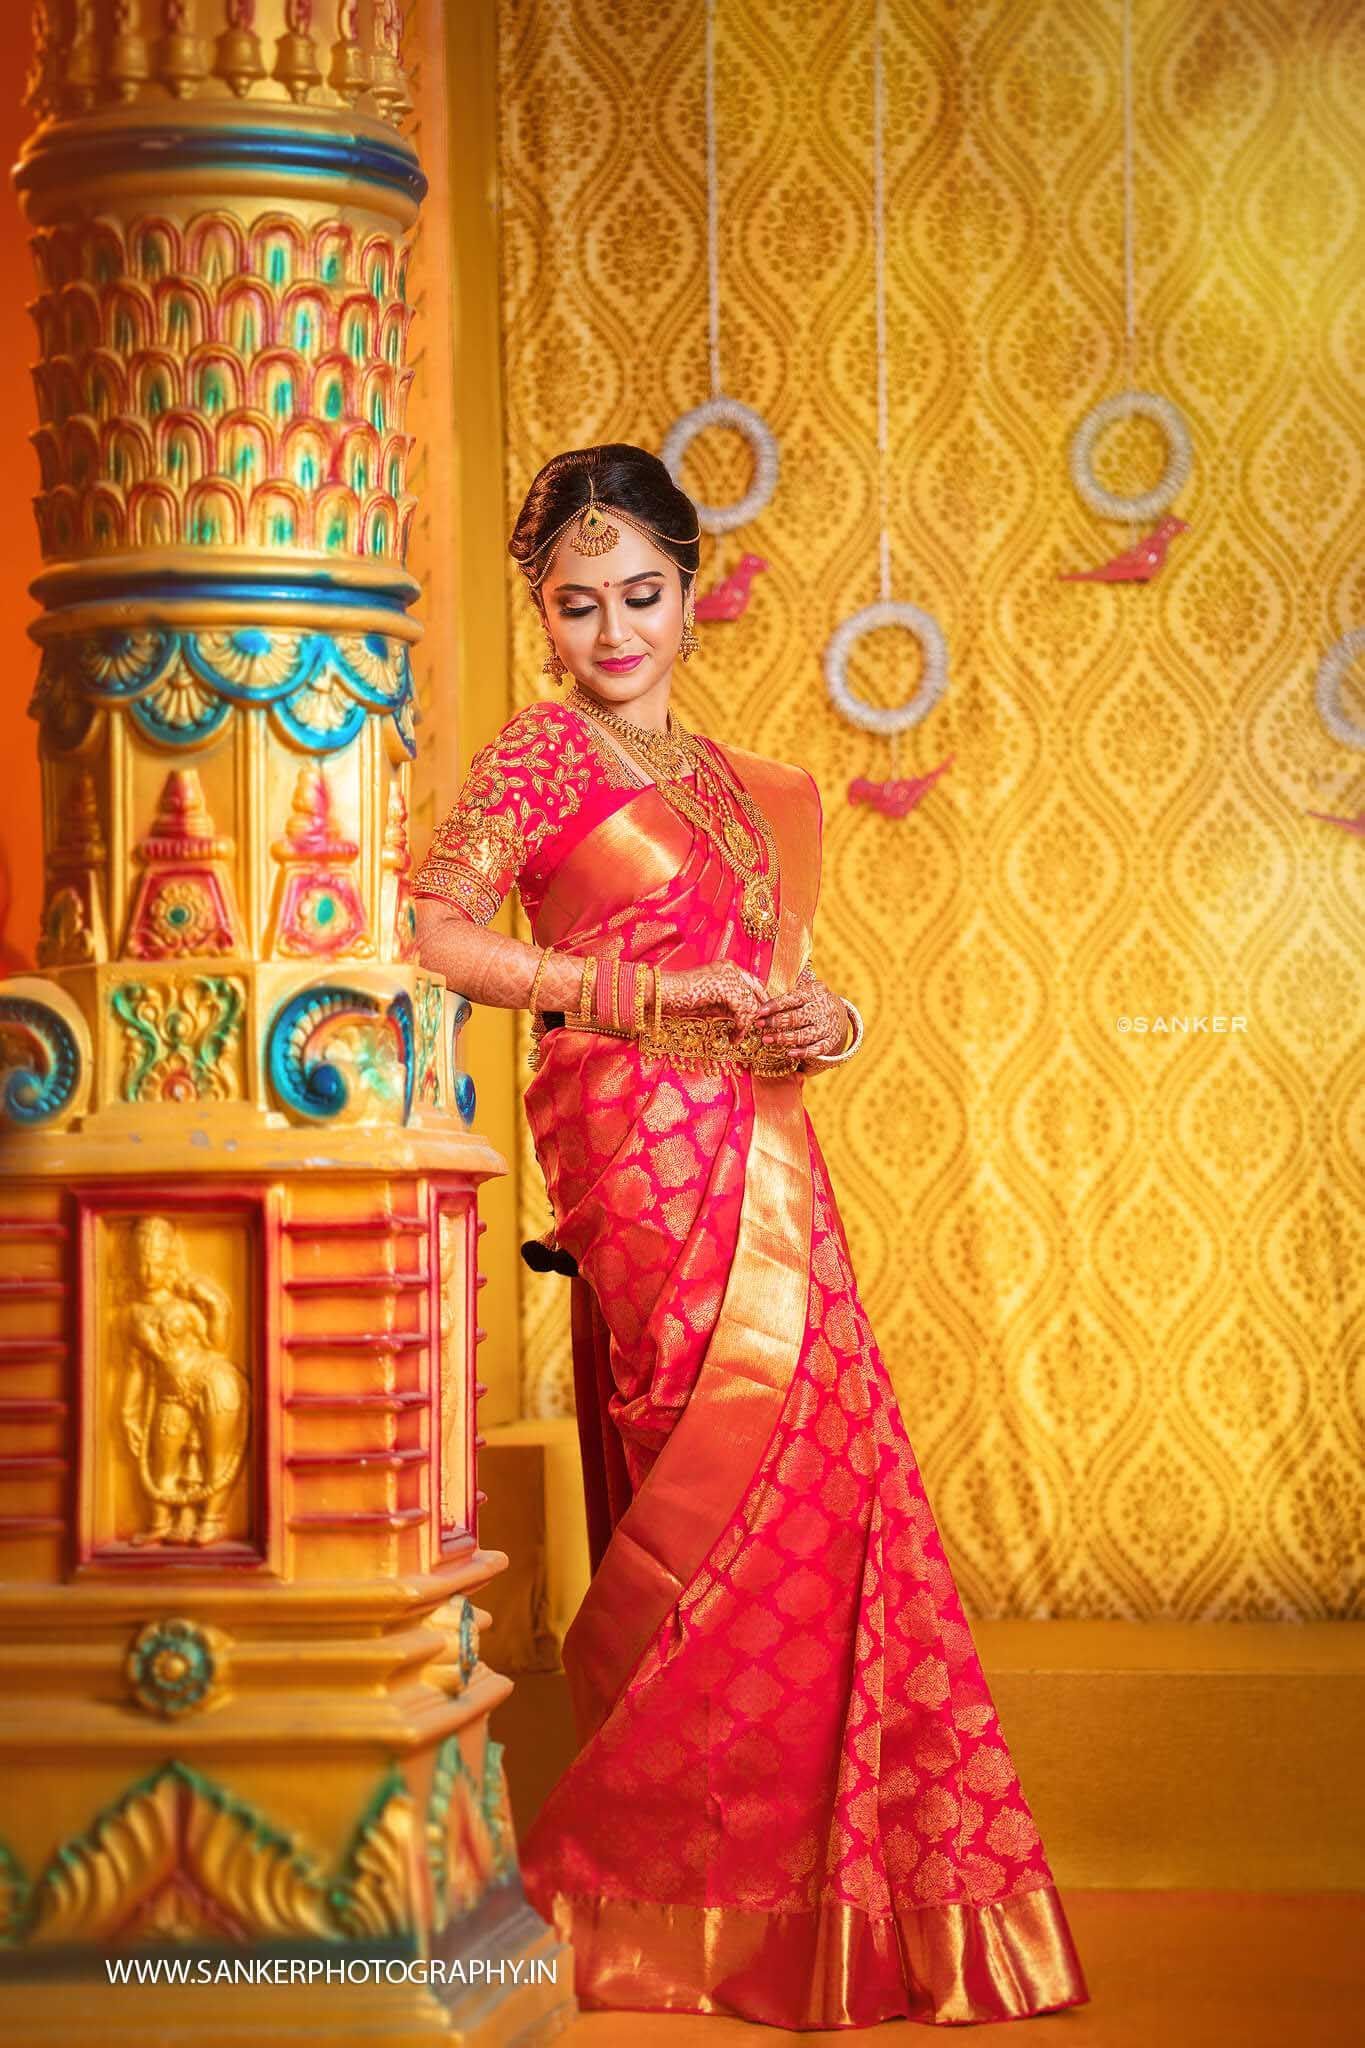 An Artfully Shot Wedding That We All Need To Check Out! -   13 wedding Indian fashion ideas